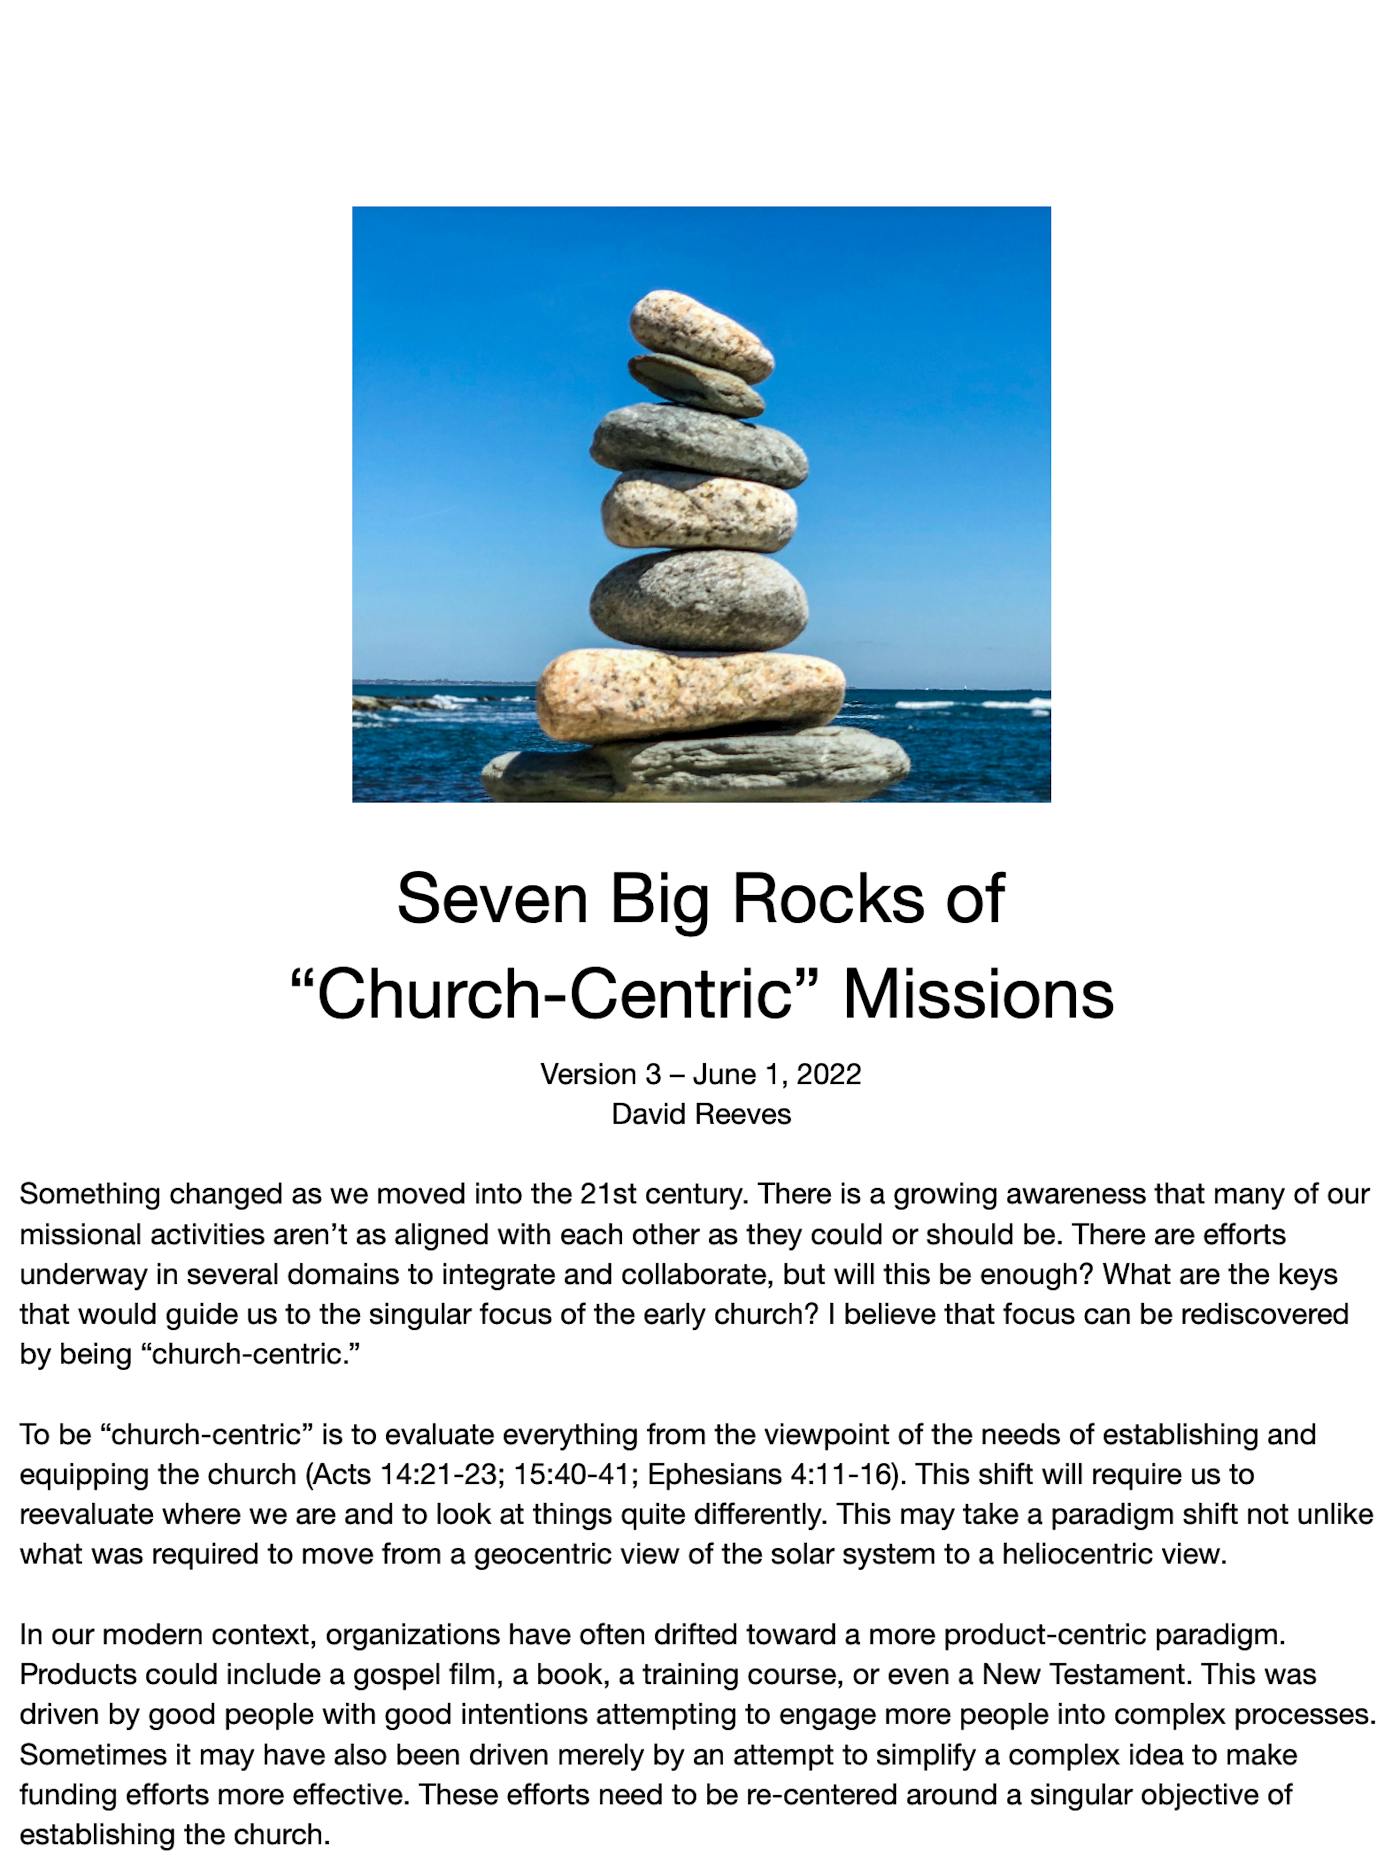 Seven Big Rocks of "Church-Centric" Missions